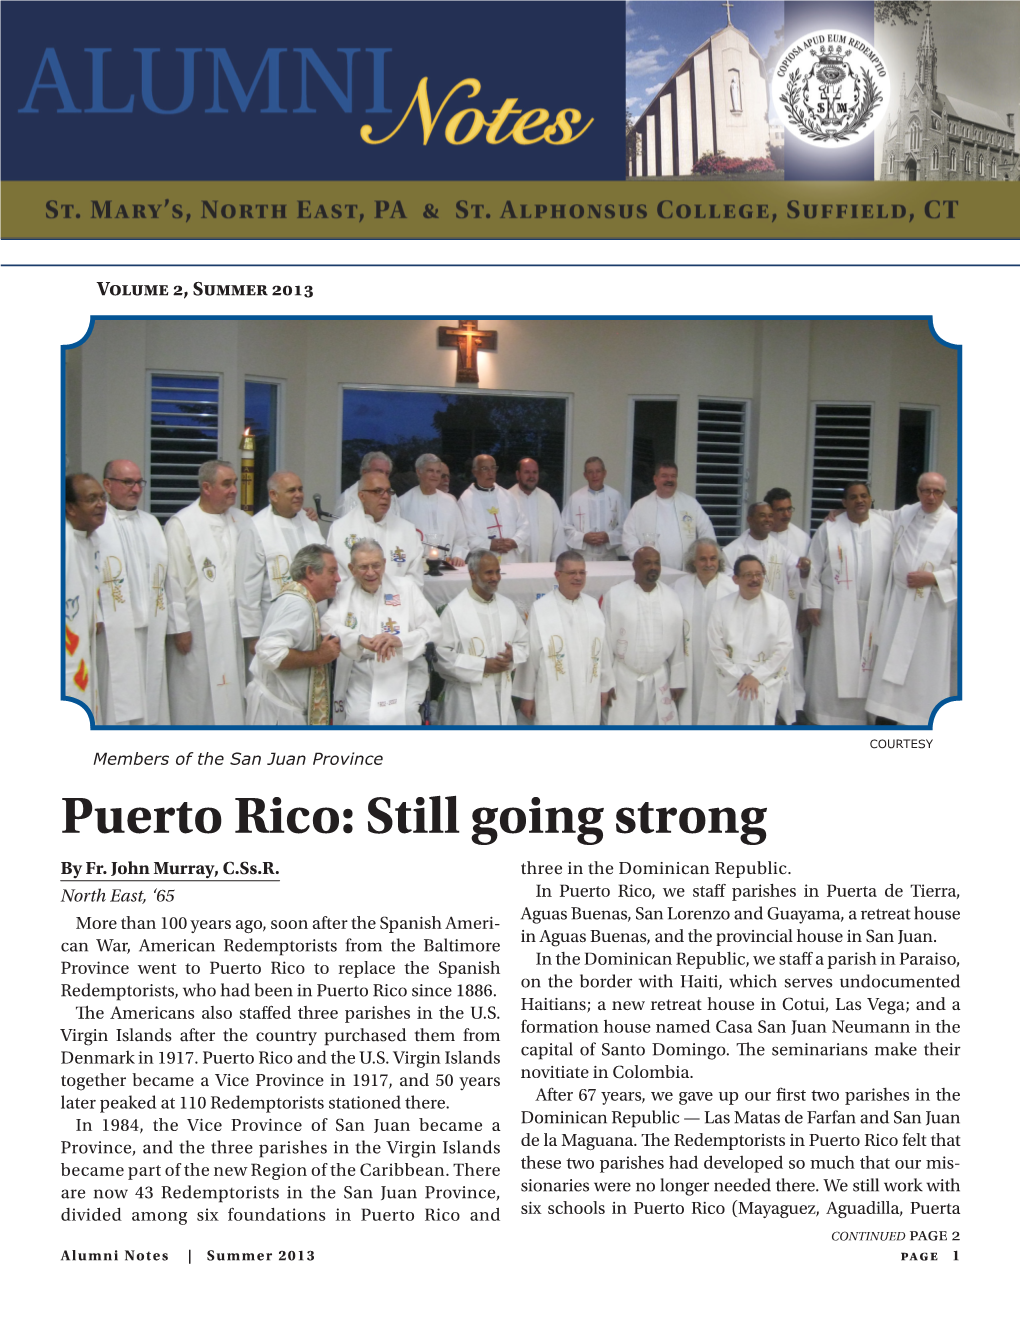 Puerto Rico: Still Going Strong by Fr